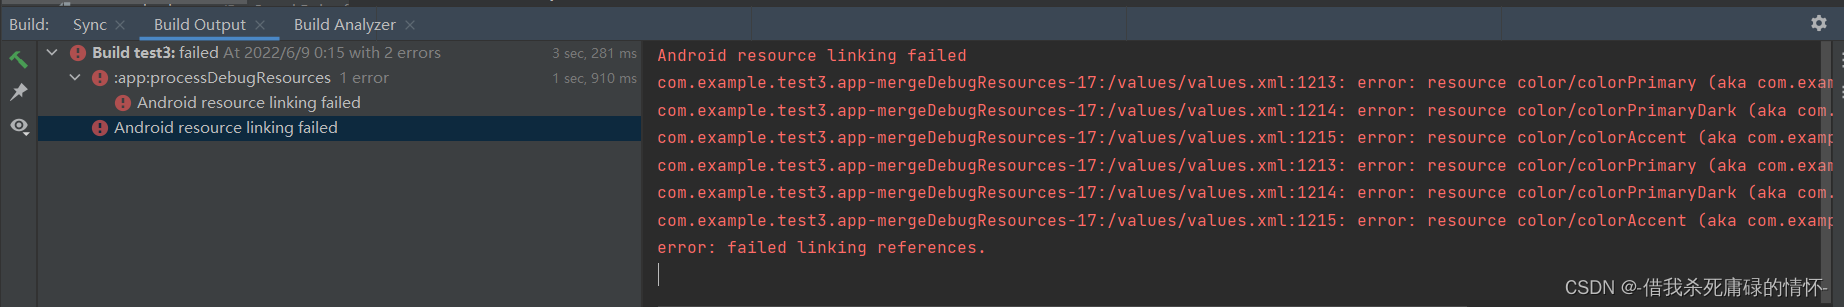 【Bug】Android resource linking failed和error: failed linking references.